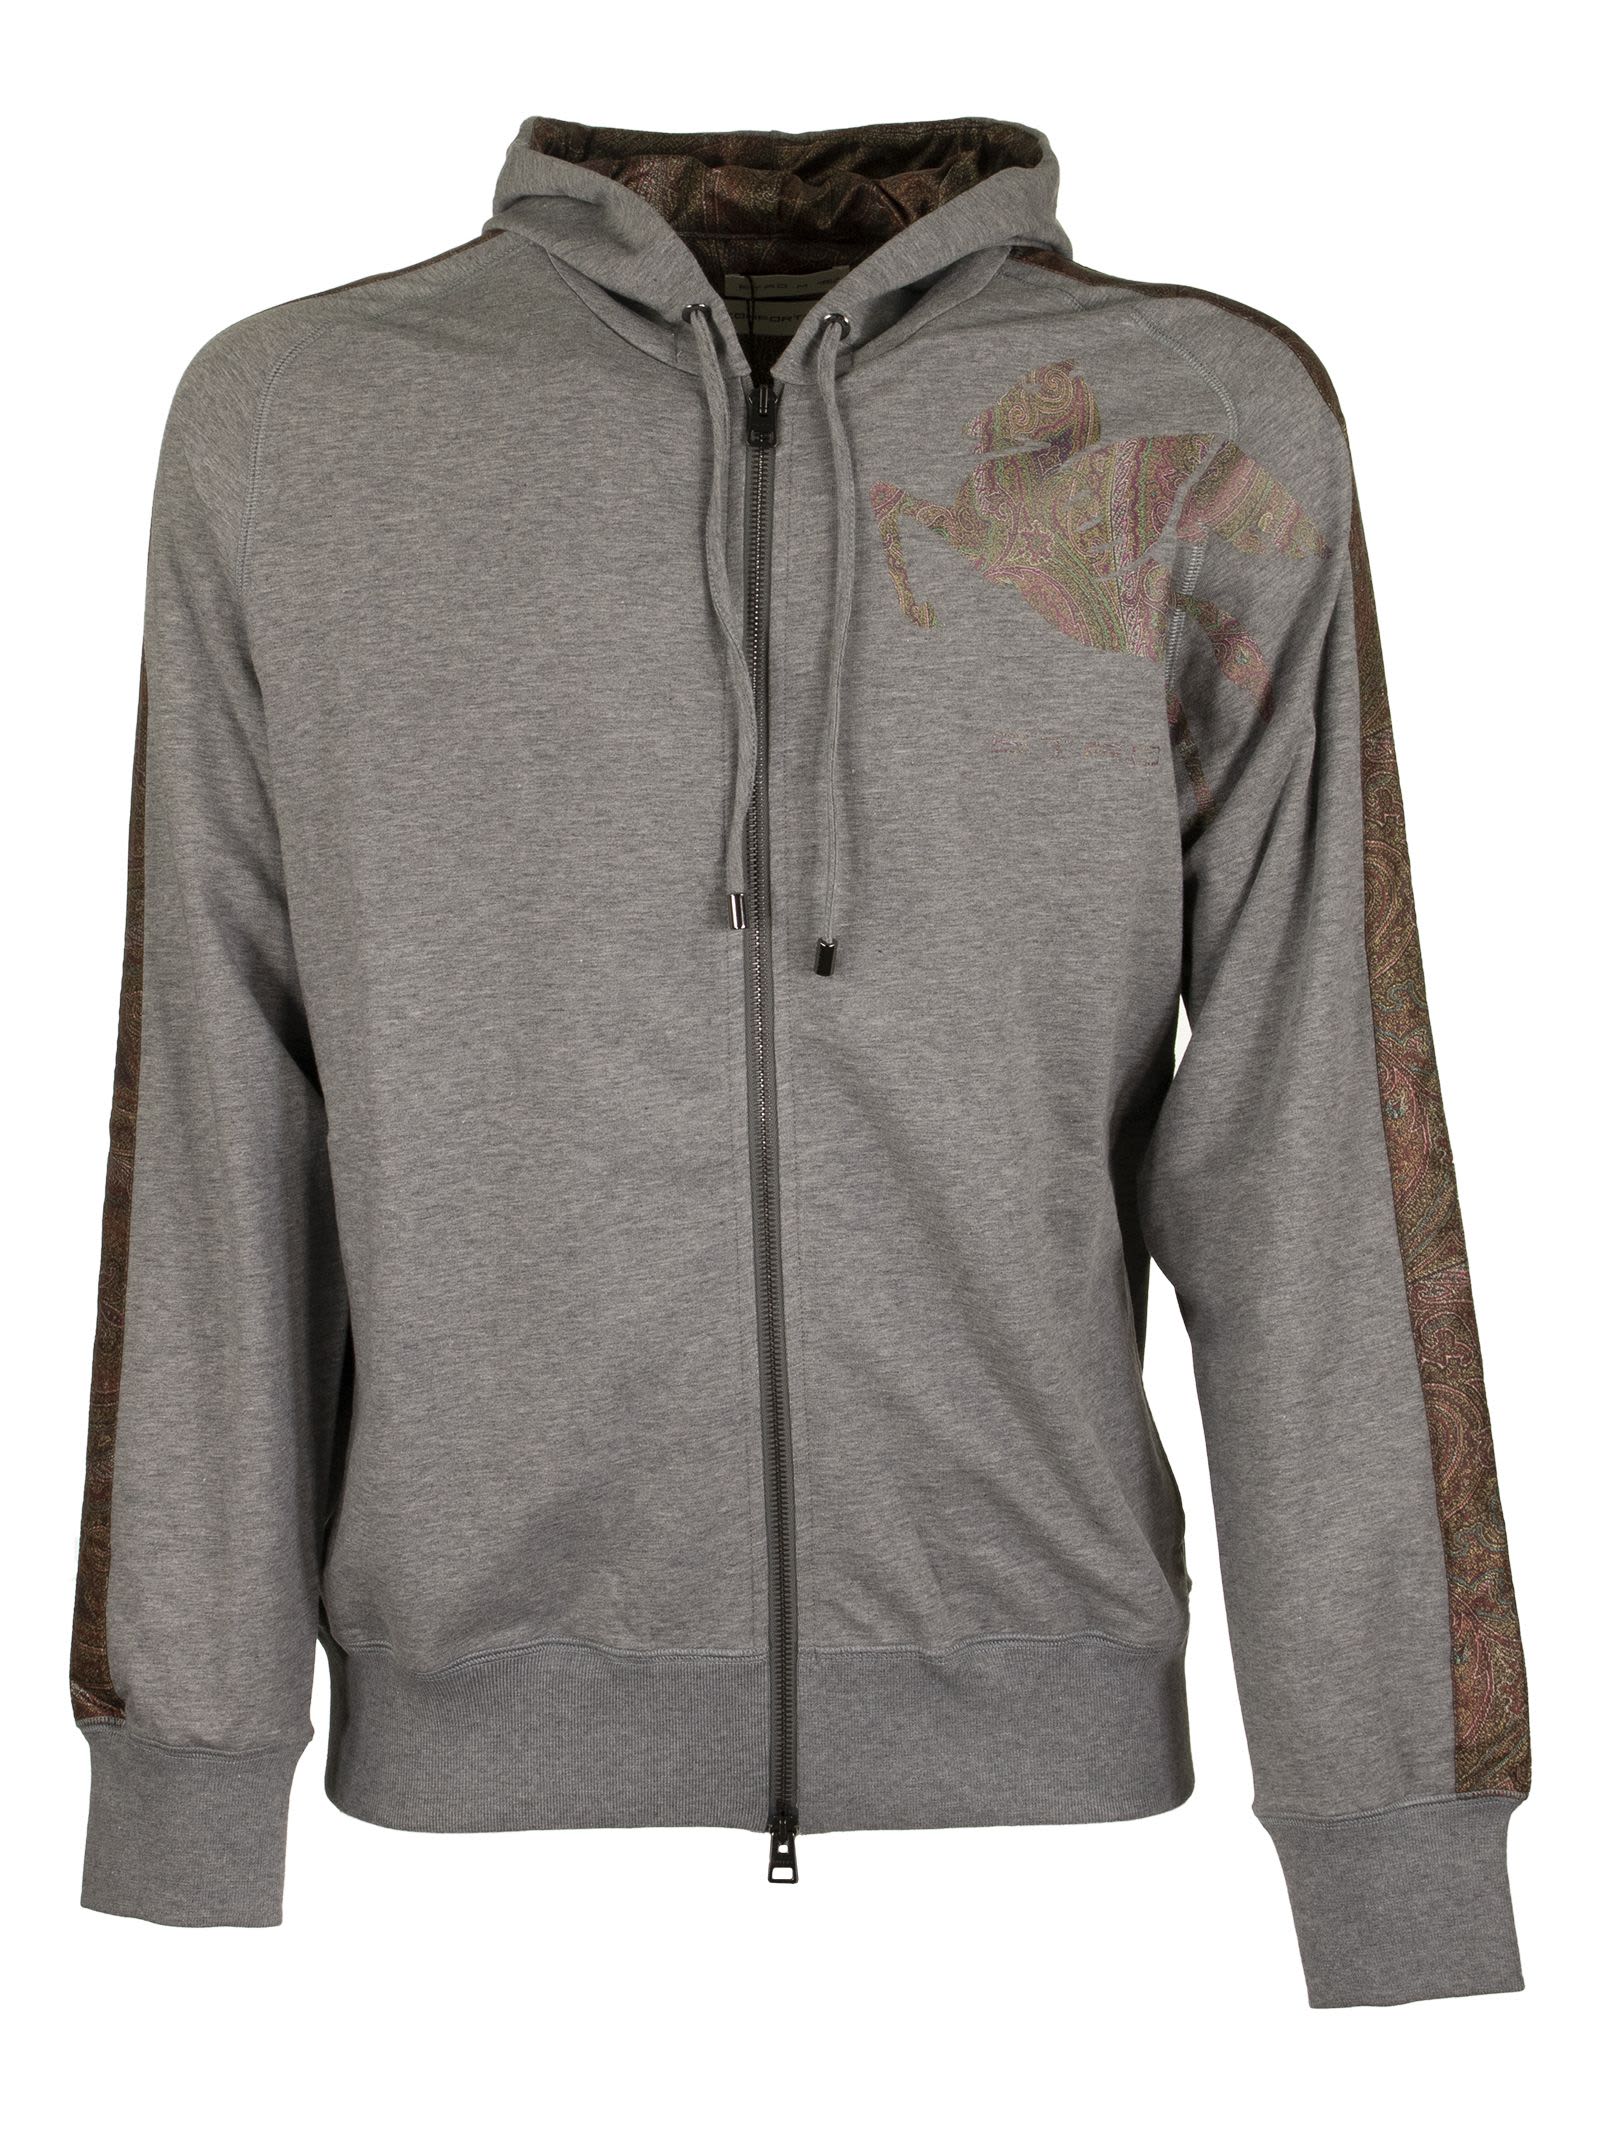 ETRO JERSEY SWEATSHIRT WITH PAISLEY DETAILS,1Y102 8280 3